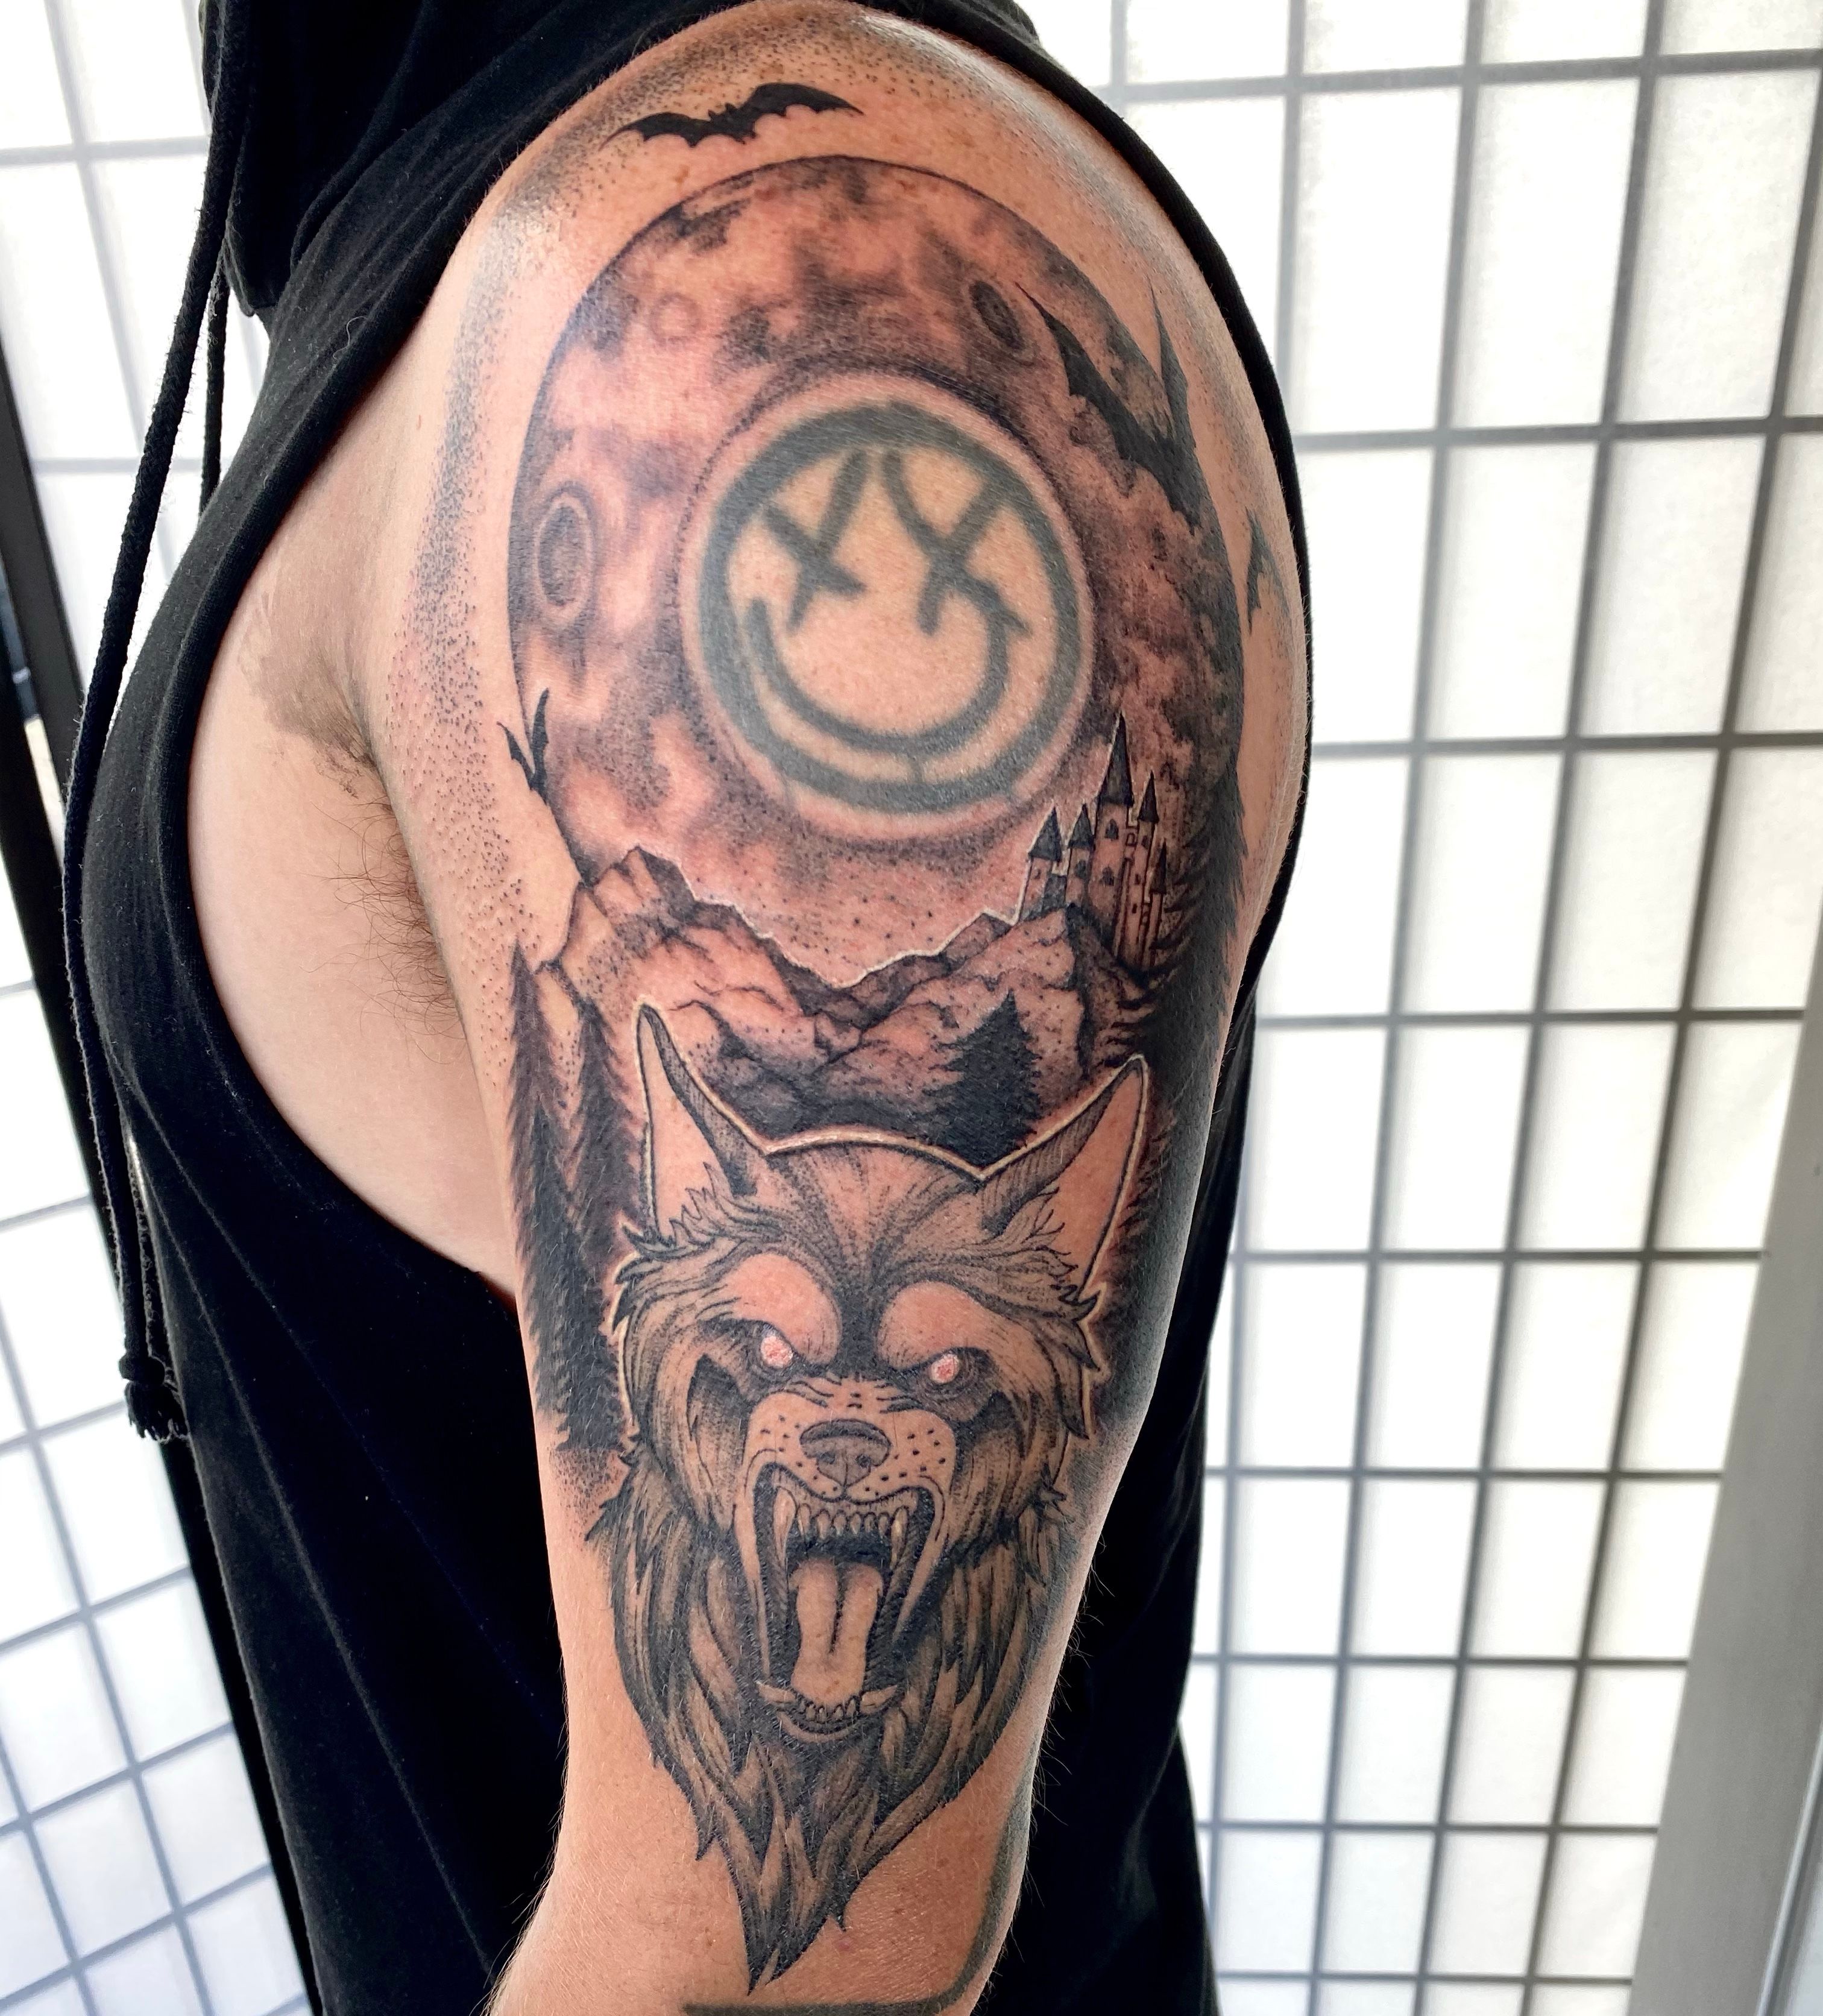 Affiliated tattoo family  Wolf image affiliatedtattoocom  indianatattooartist indianatattoos indianapolis indianatattooart  affiliatedtattoojoinus affiliatedtattoofamily tattooist fogetaboutit  wolves wolfman killerwolves 